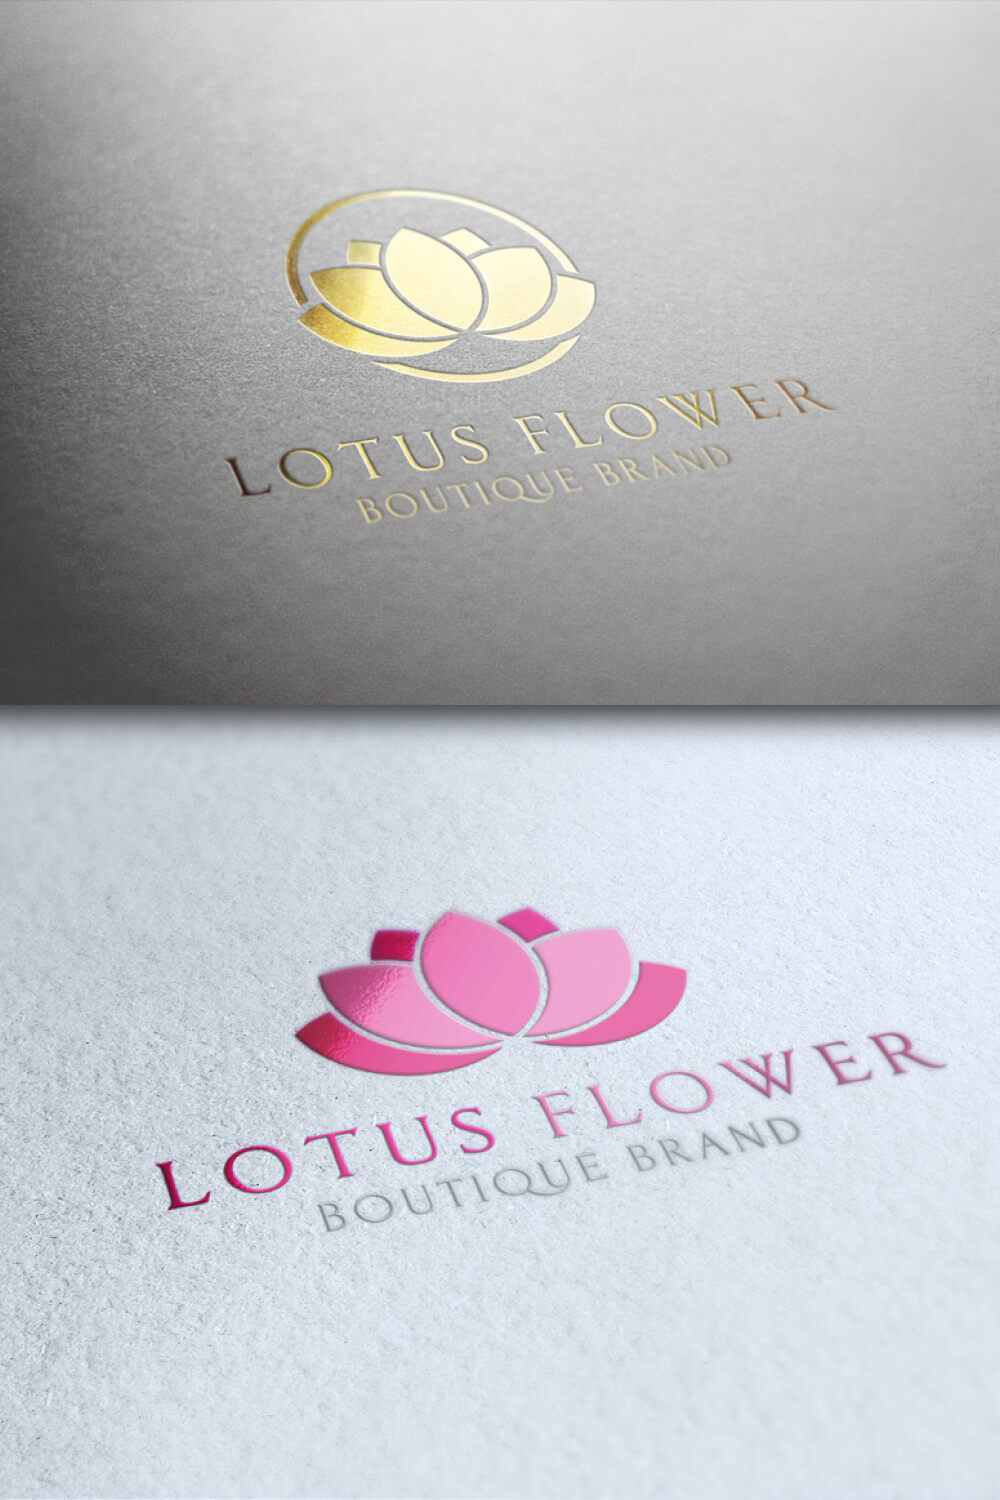 Two lotus flower logos in gold and pink.